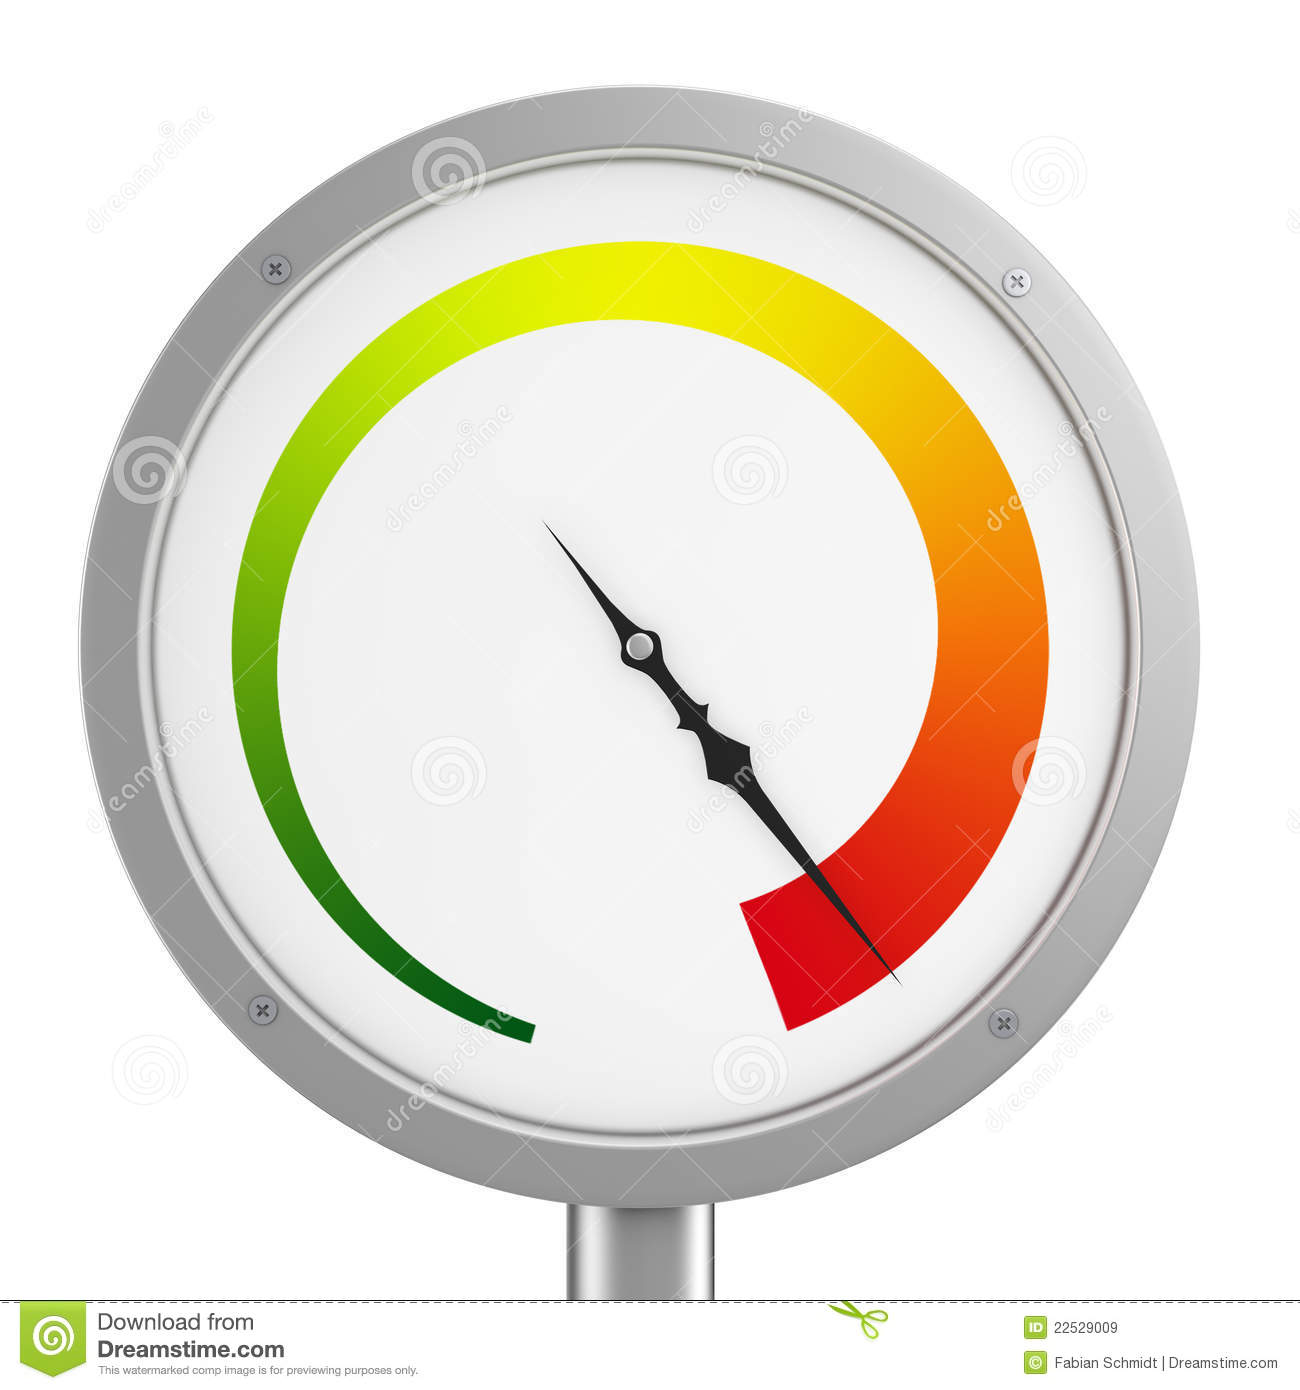 Pressure Gauge Isolated On White Background In Red Area Closeup 